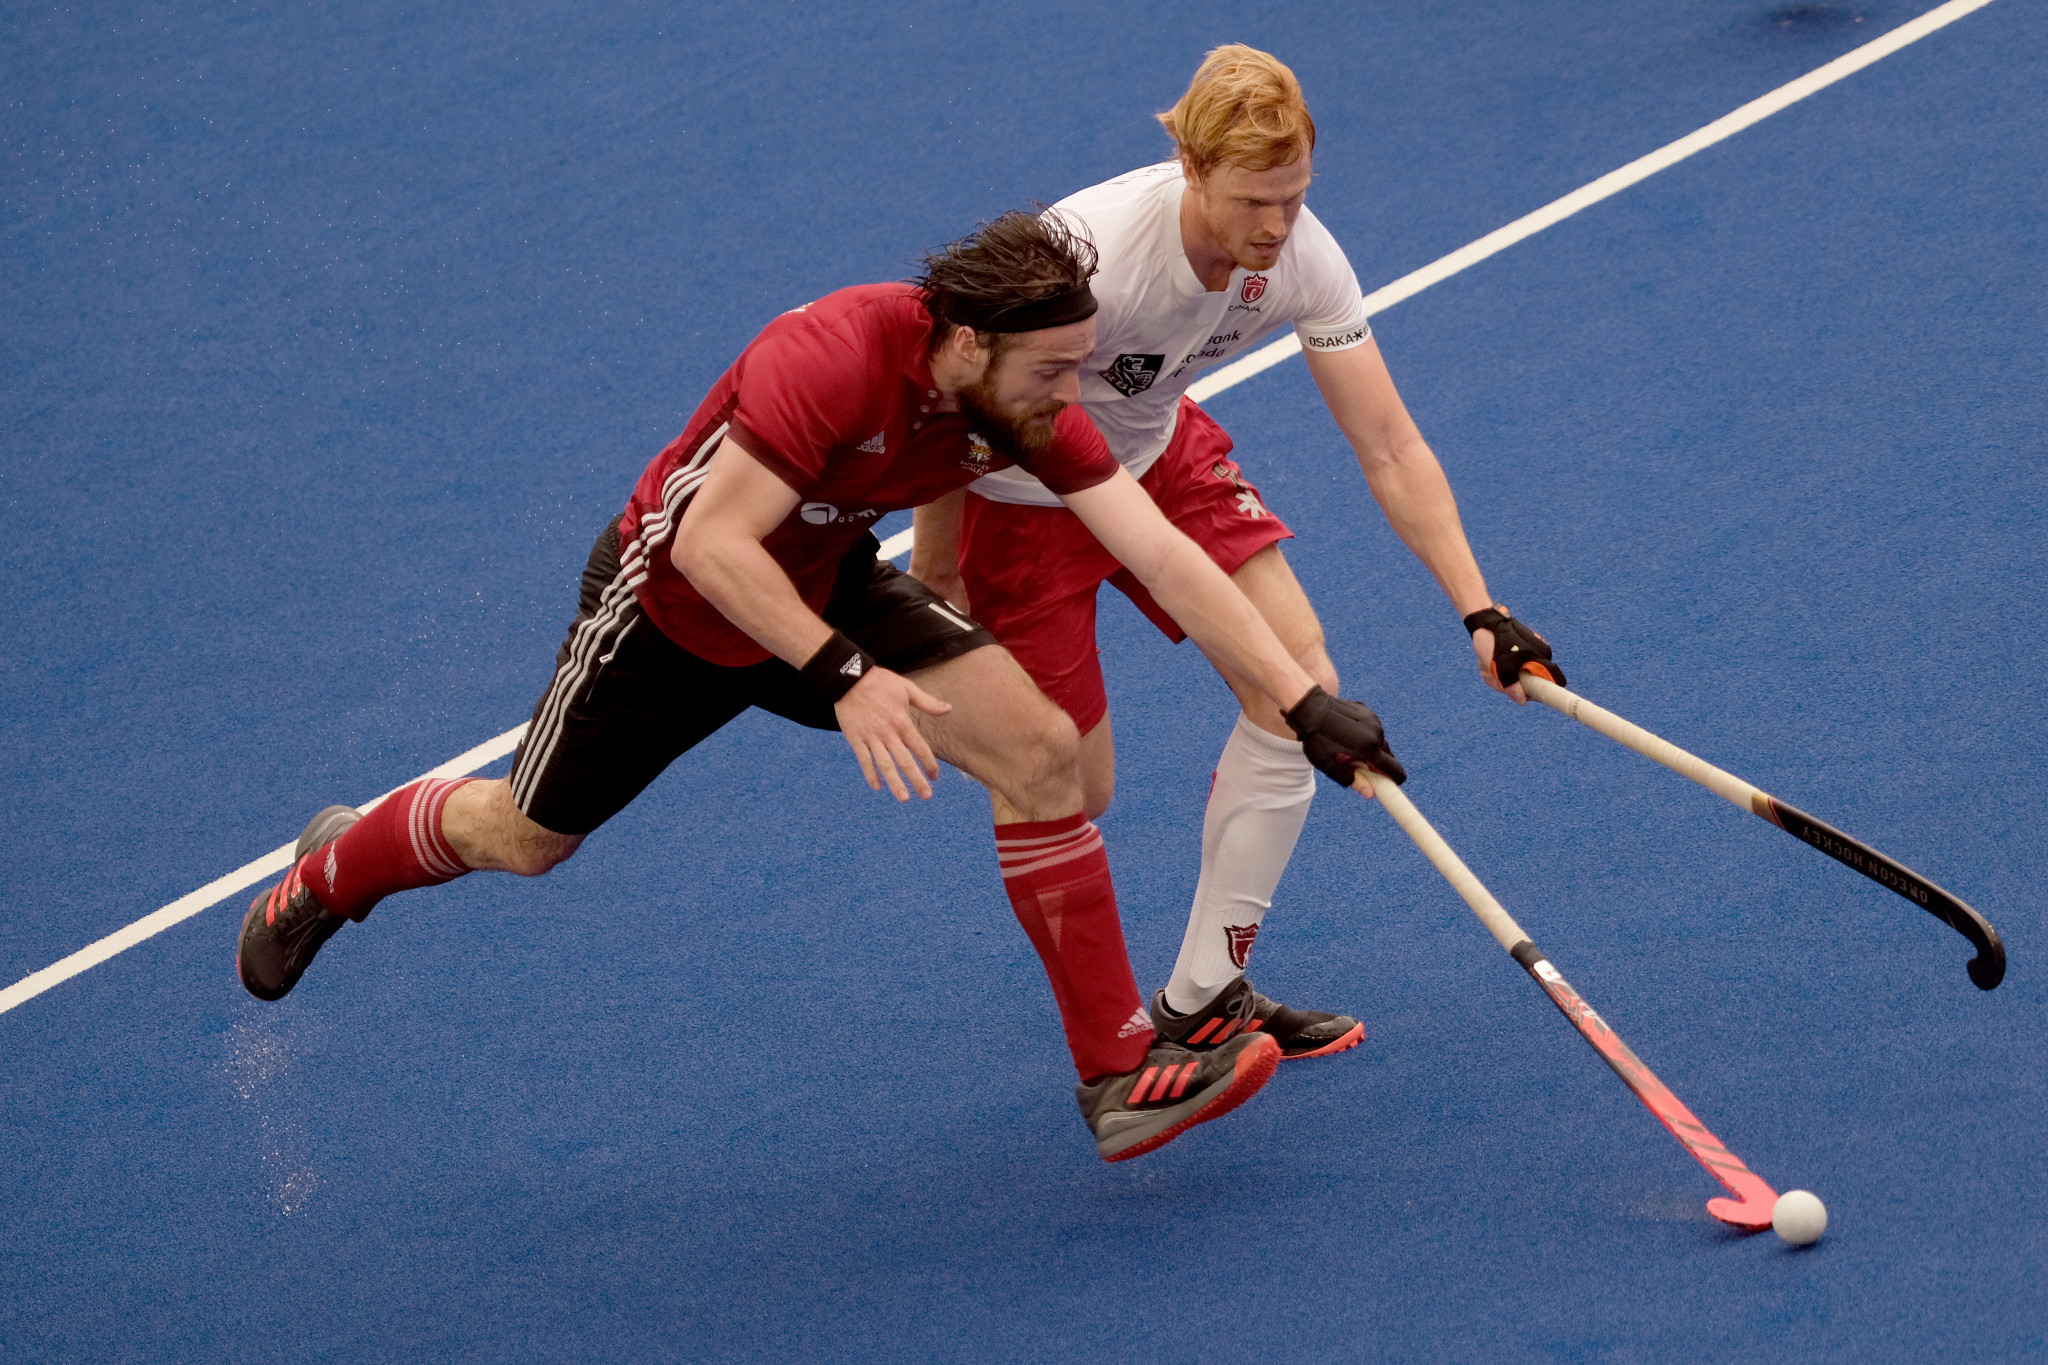 Wales surprise Canada on opening day of FIH Series Finals in Kuala Lumpur